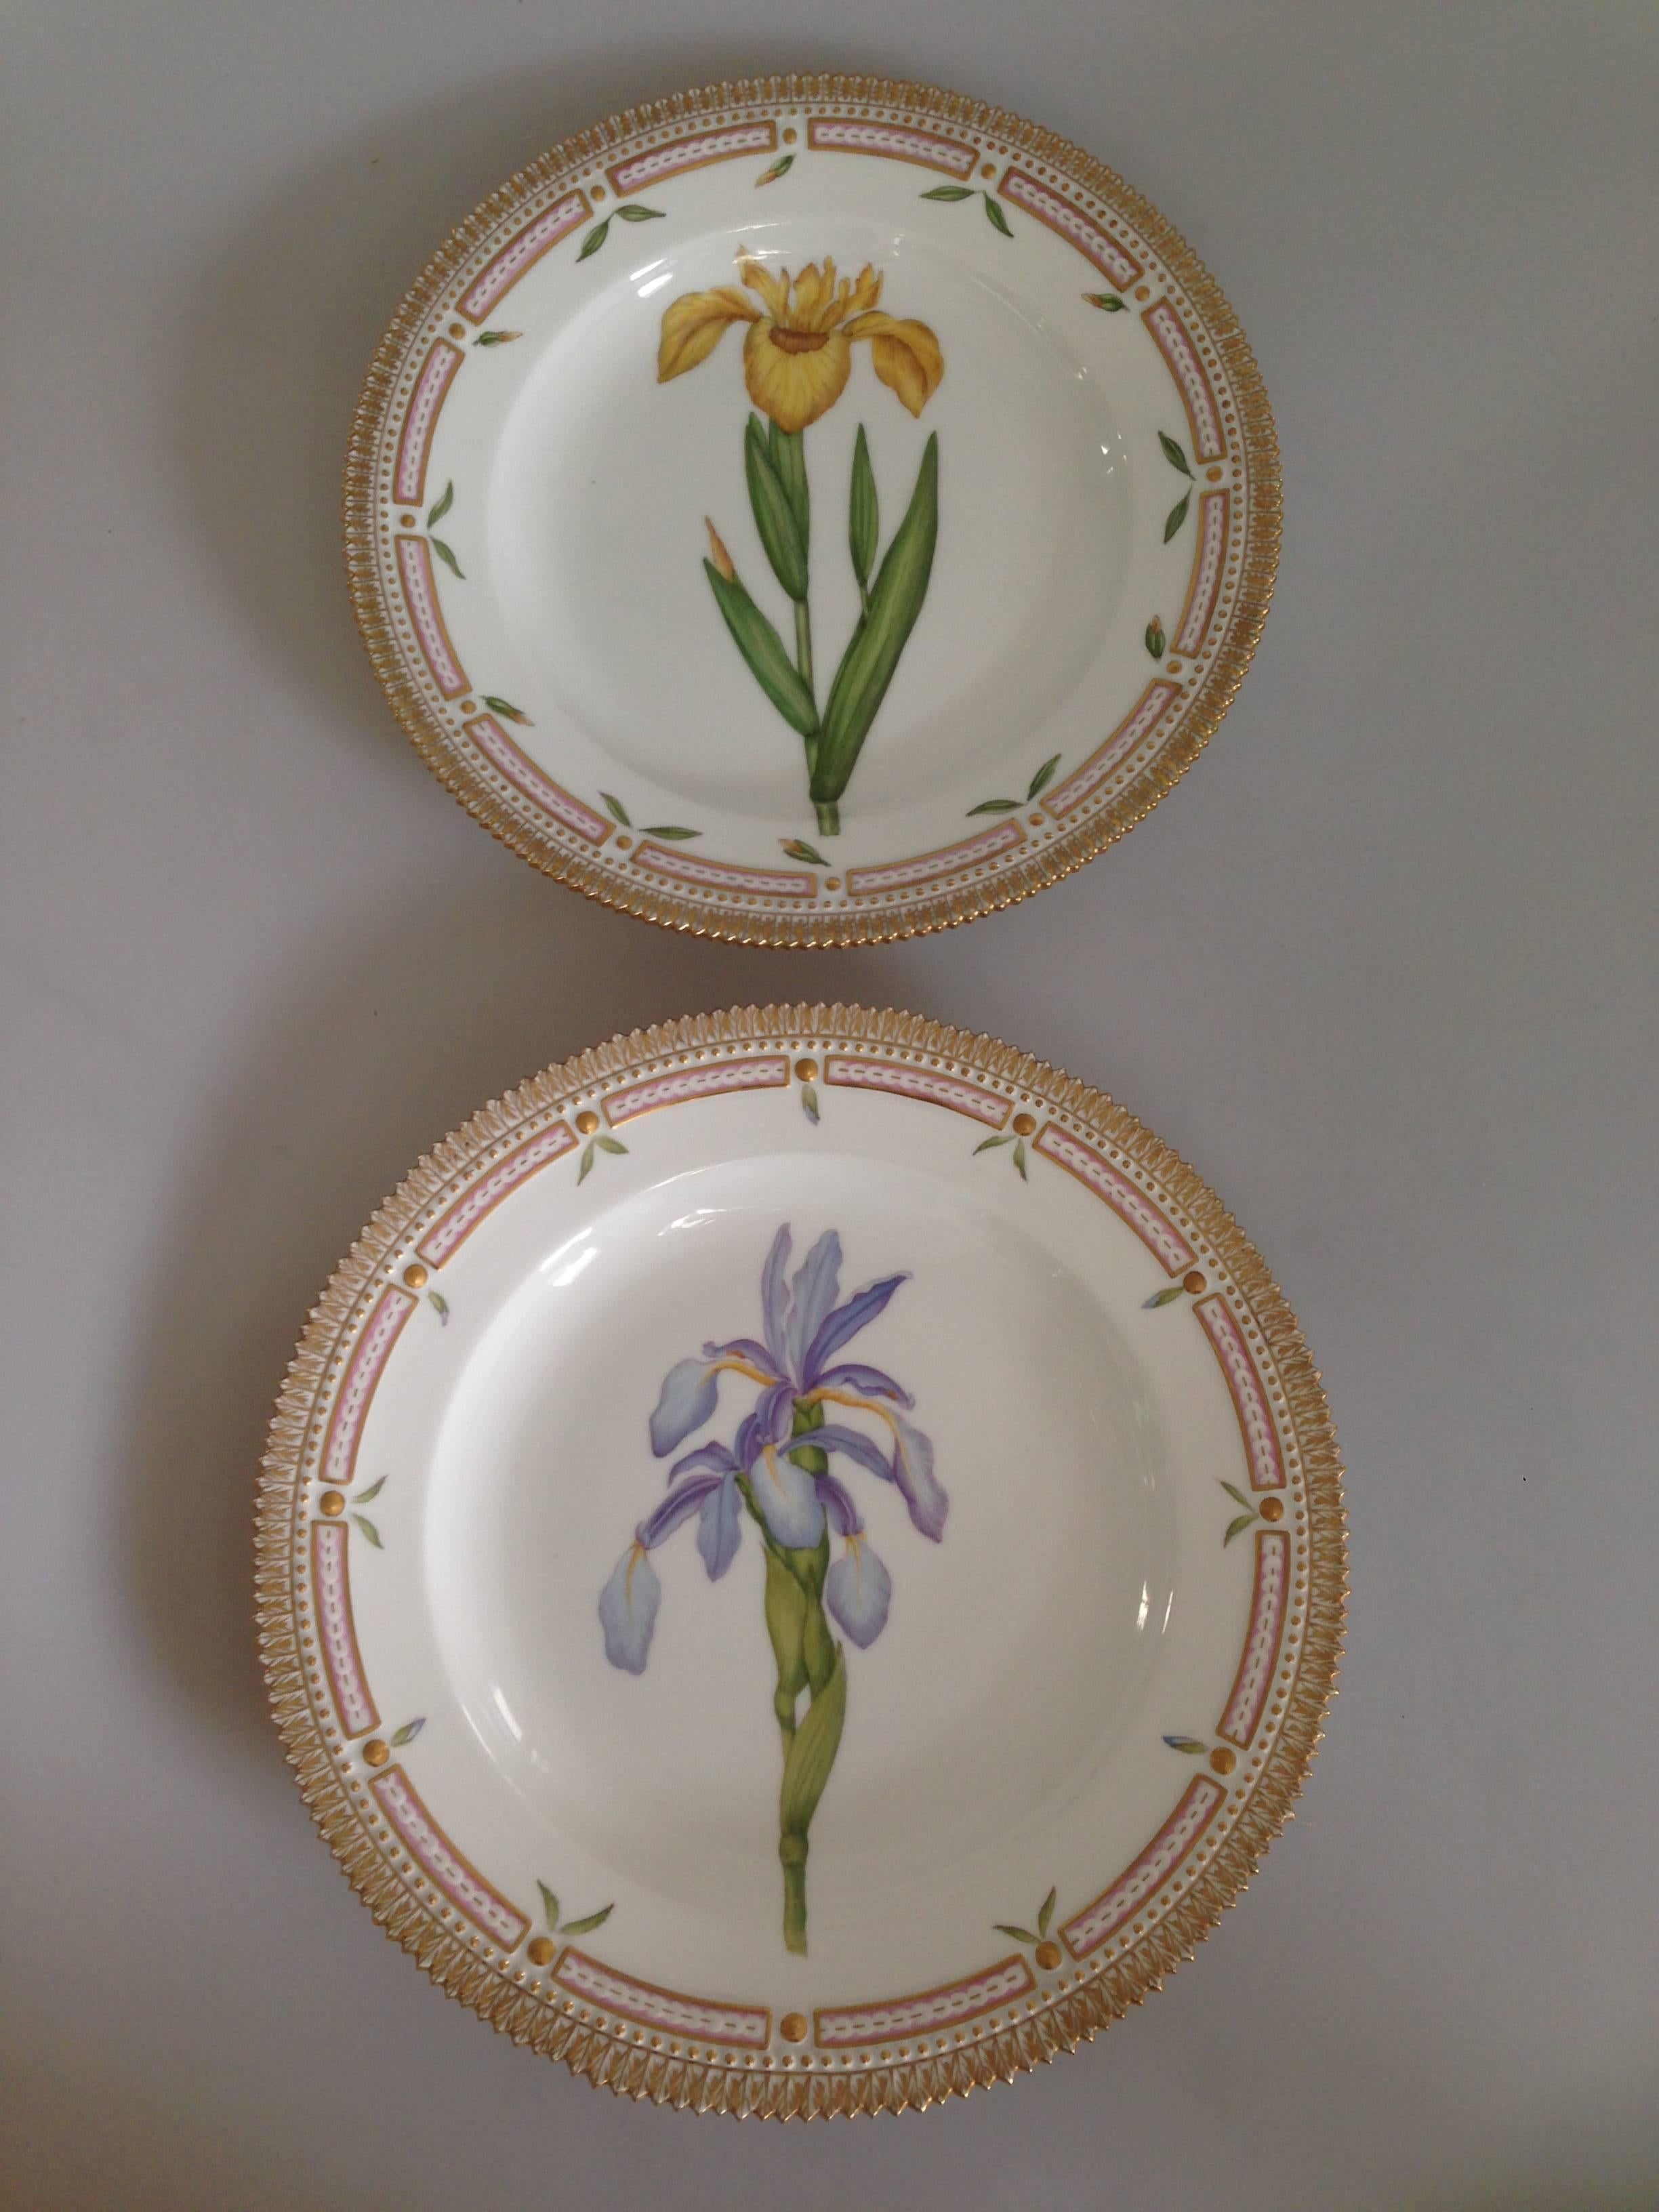 This is a set of 12 dinner plates. All different flowers. All from made from 1935-1970.

#20/3546.

The history behind Flora Danica.

Naturale science.

During the golden age of porcelain production in Europe, the elite began to take an